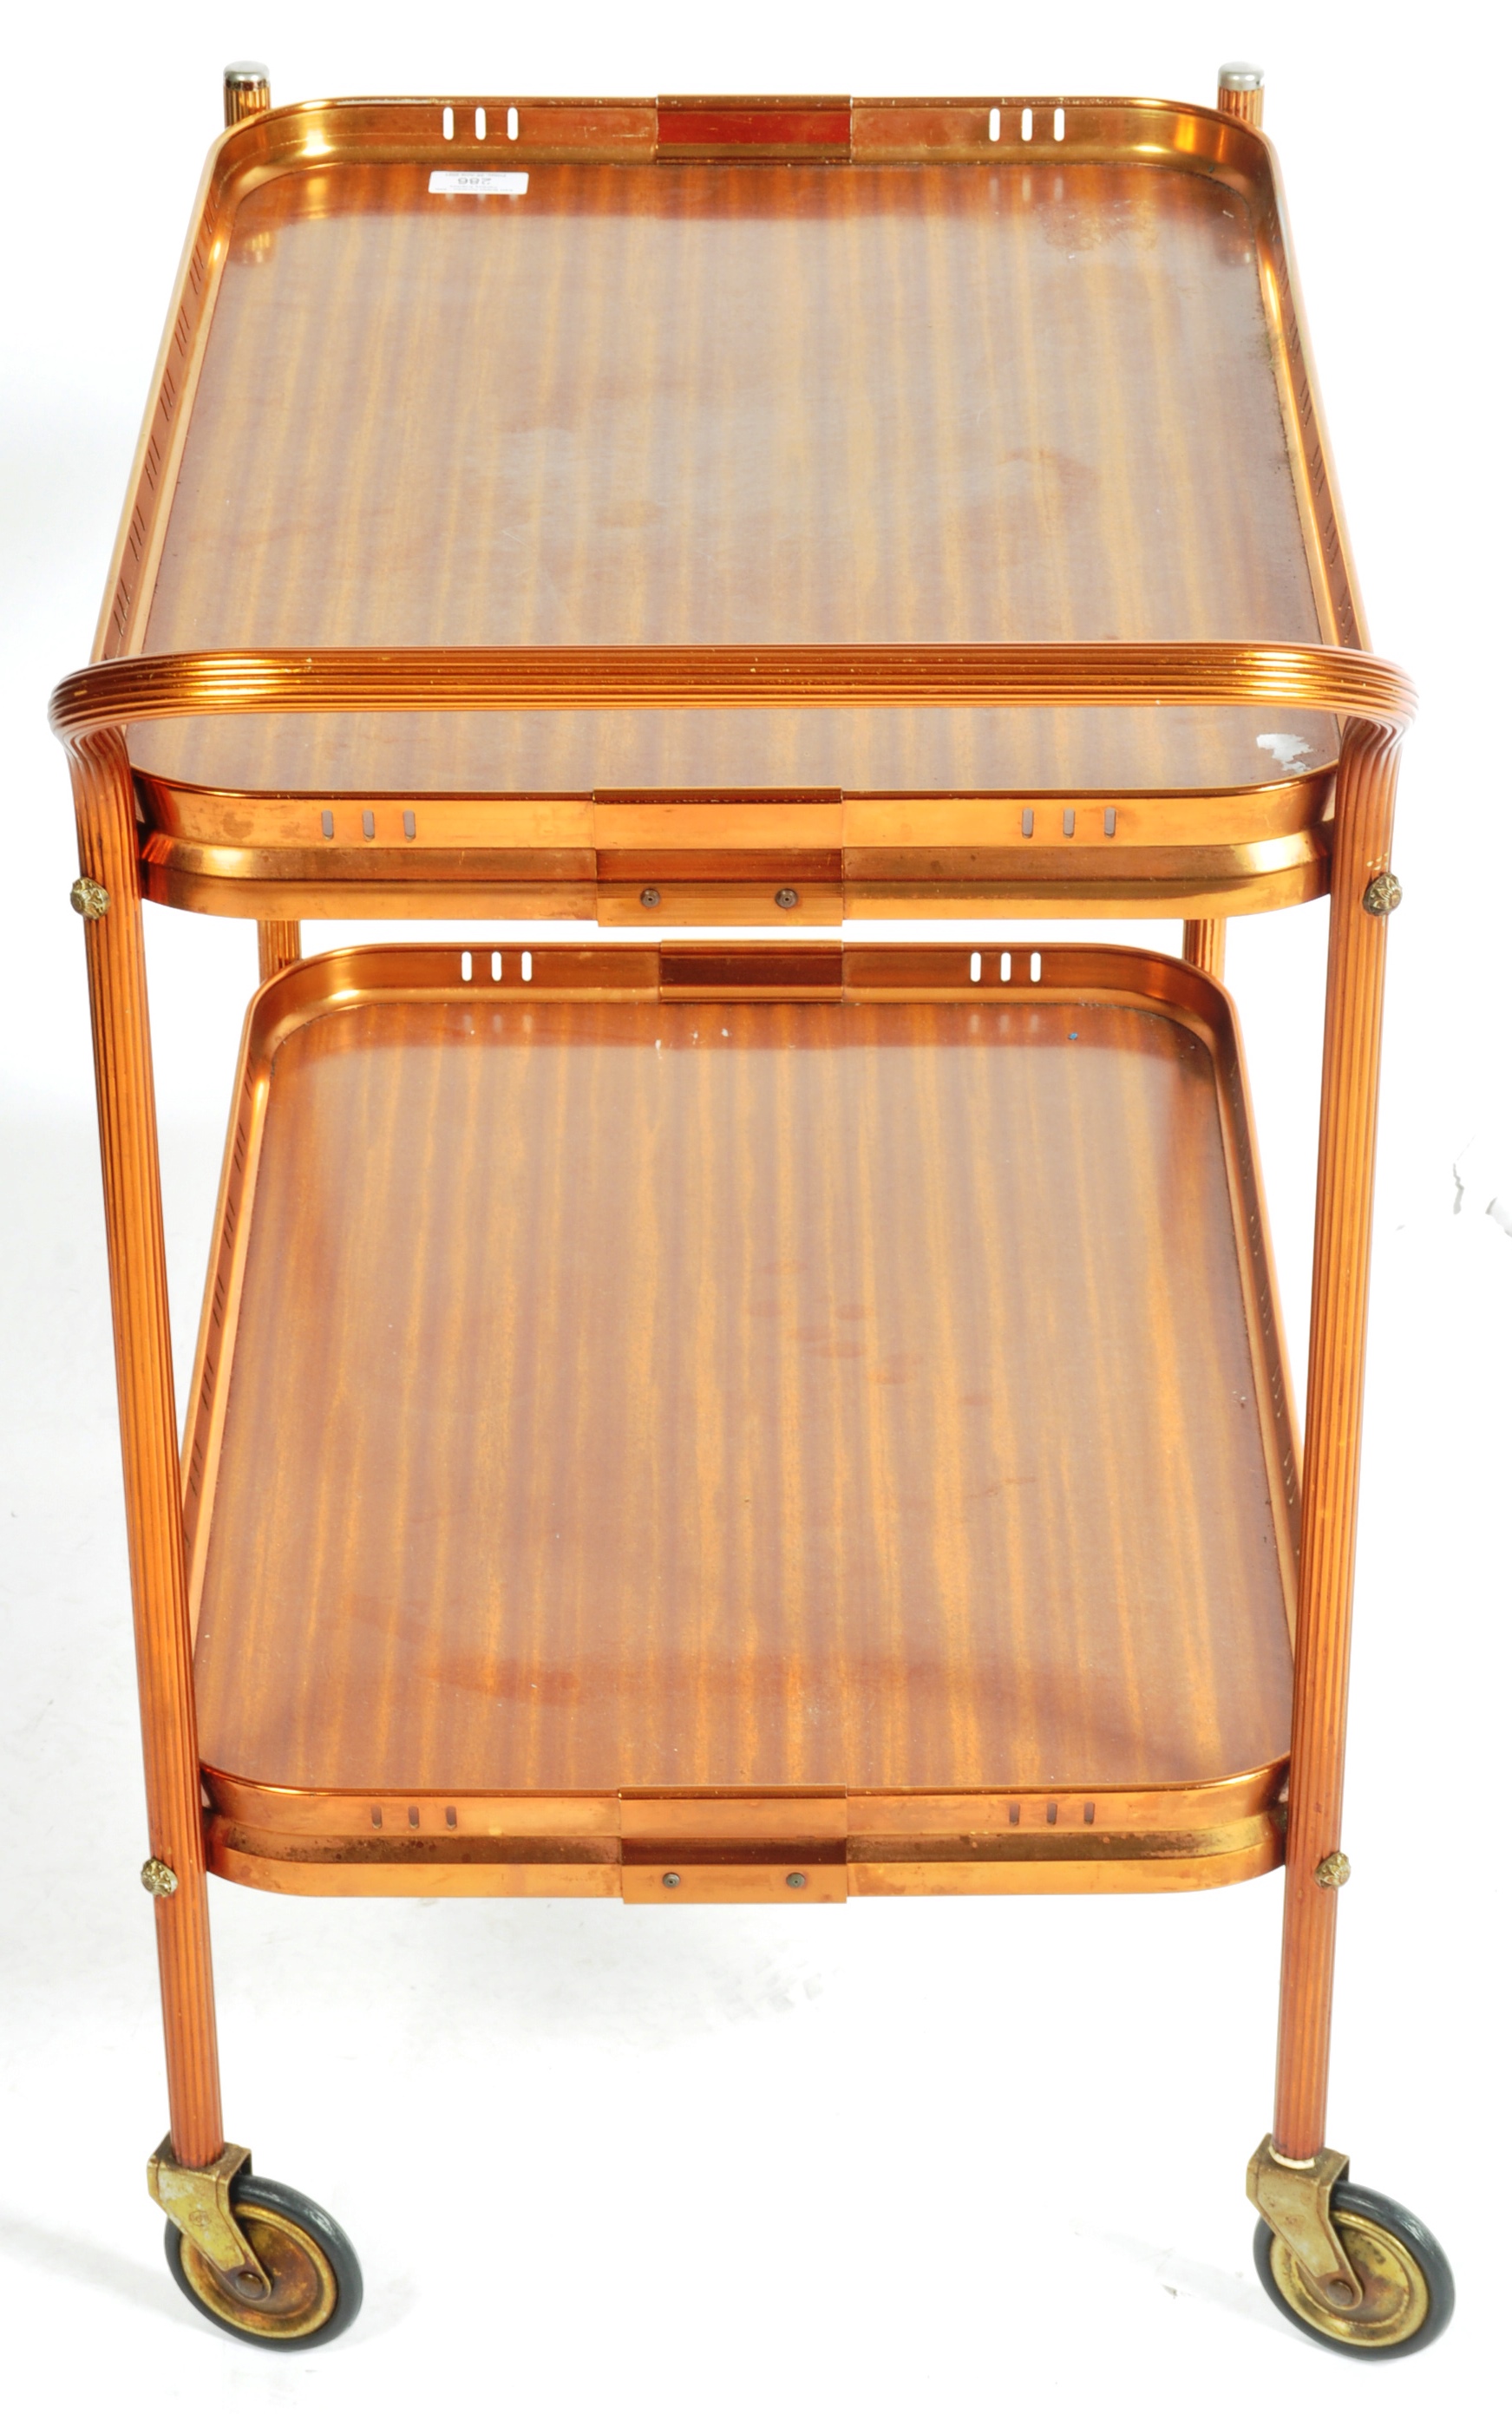 MID CENTURY COPPER TONE METAL TWO TIER DRINKS TROLLEY - Image 8 of 8